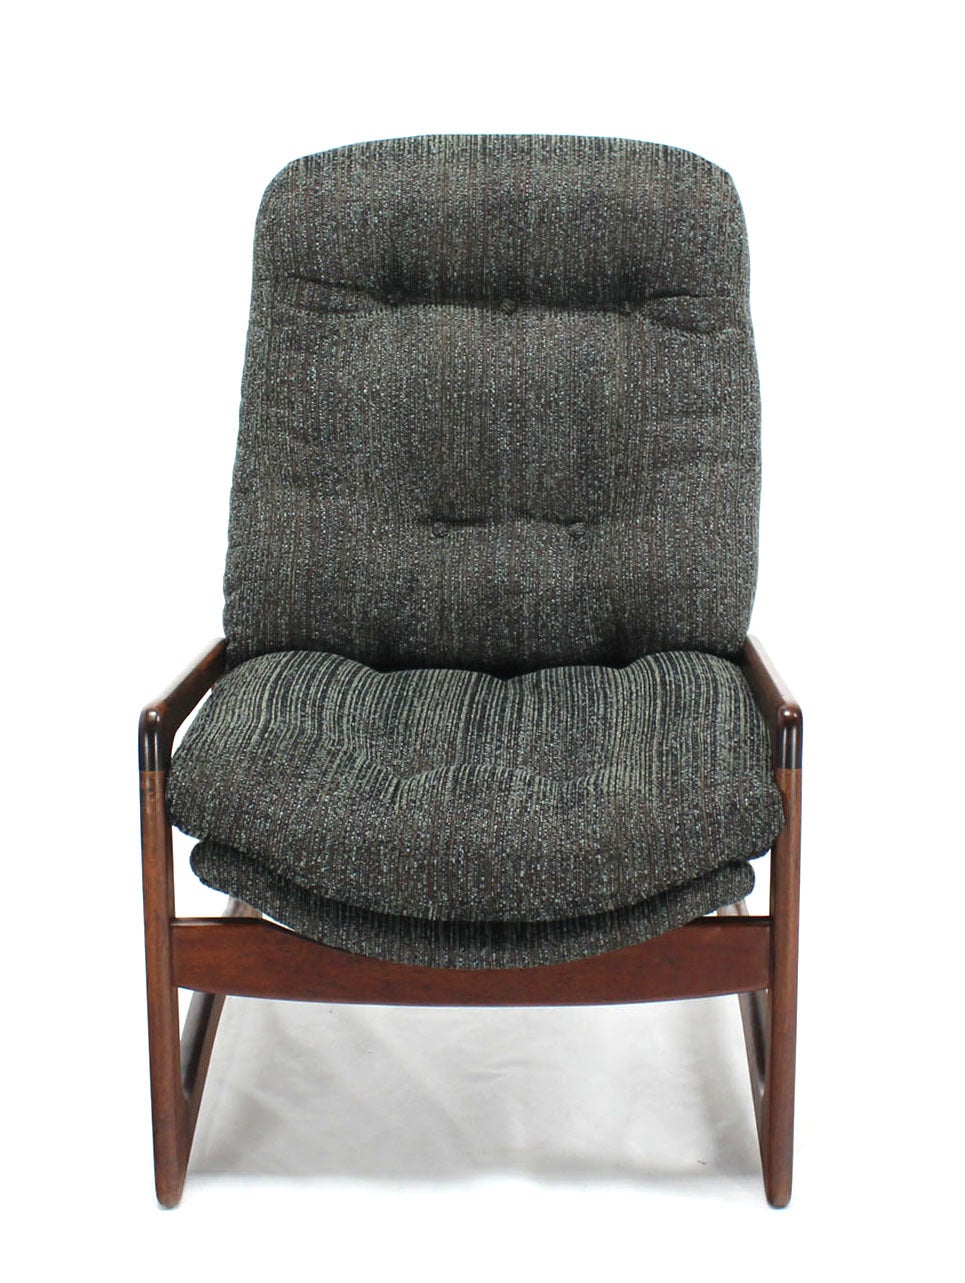 Newly upholstered Adrian Pearsall lounge chair. Gorgeous oiled walnut frame.